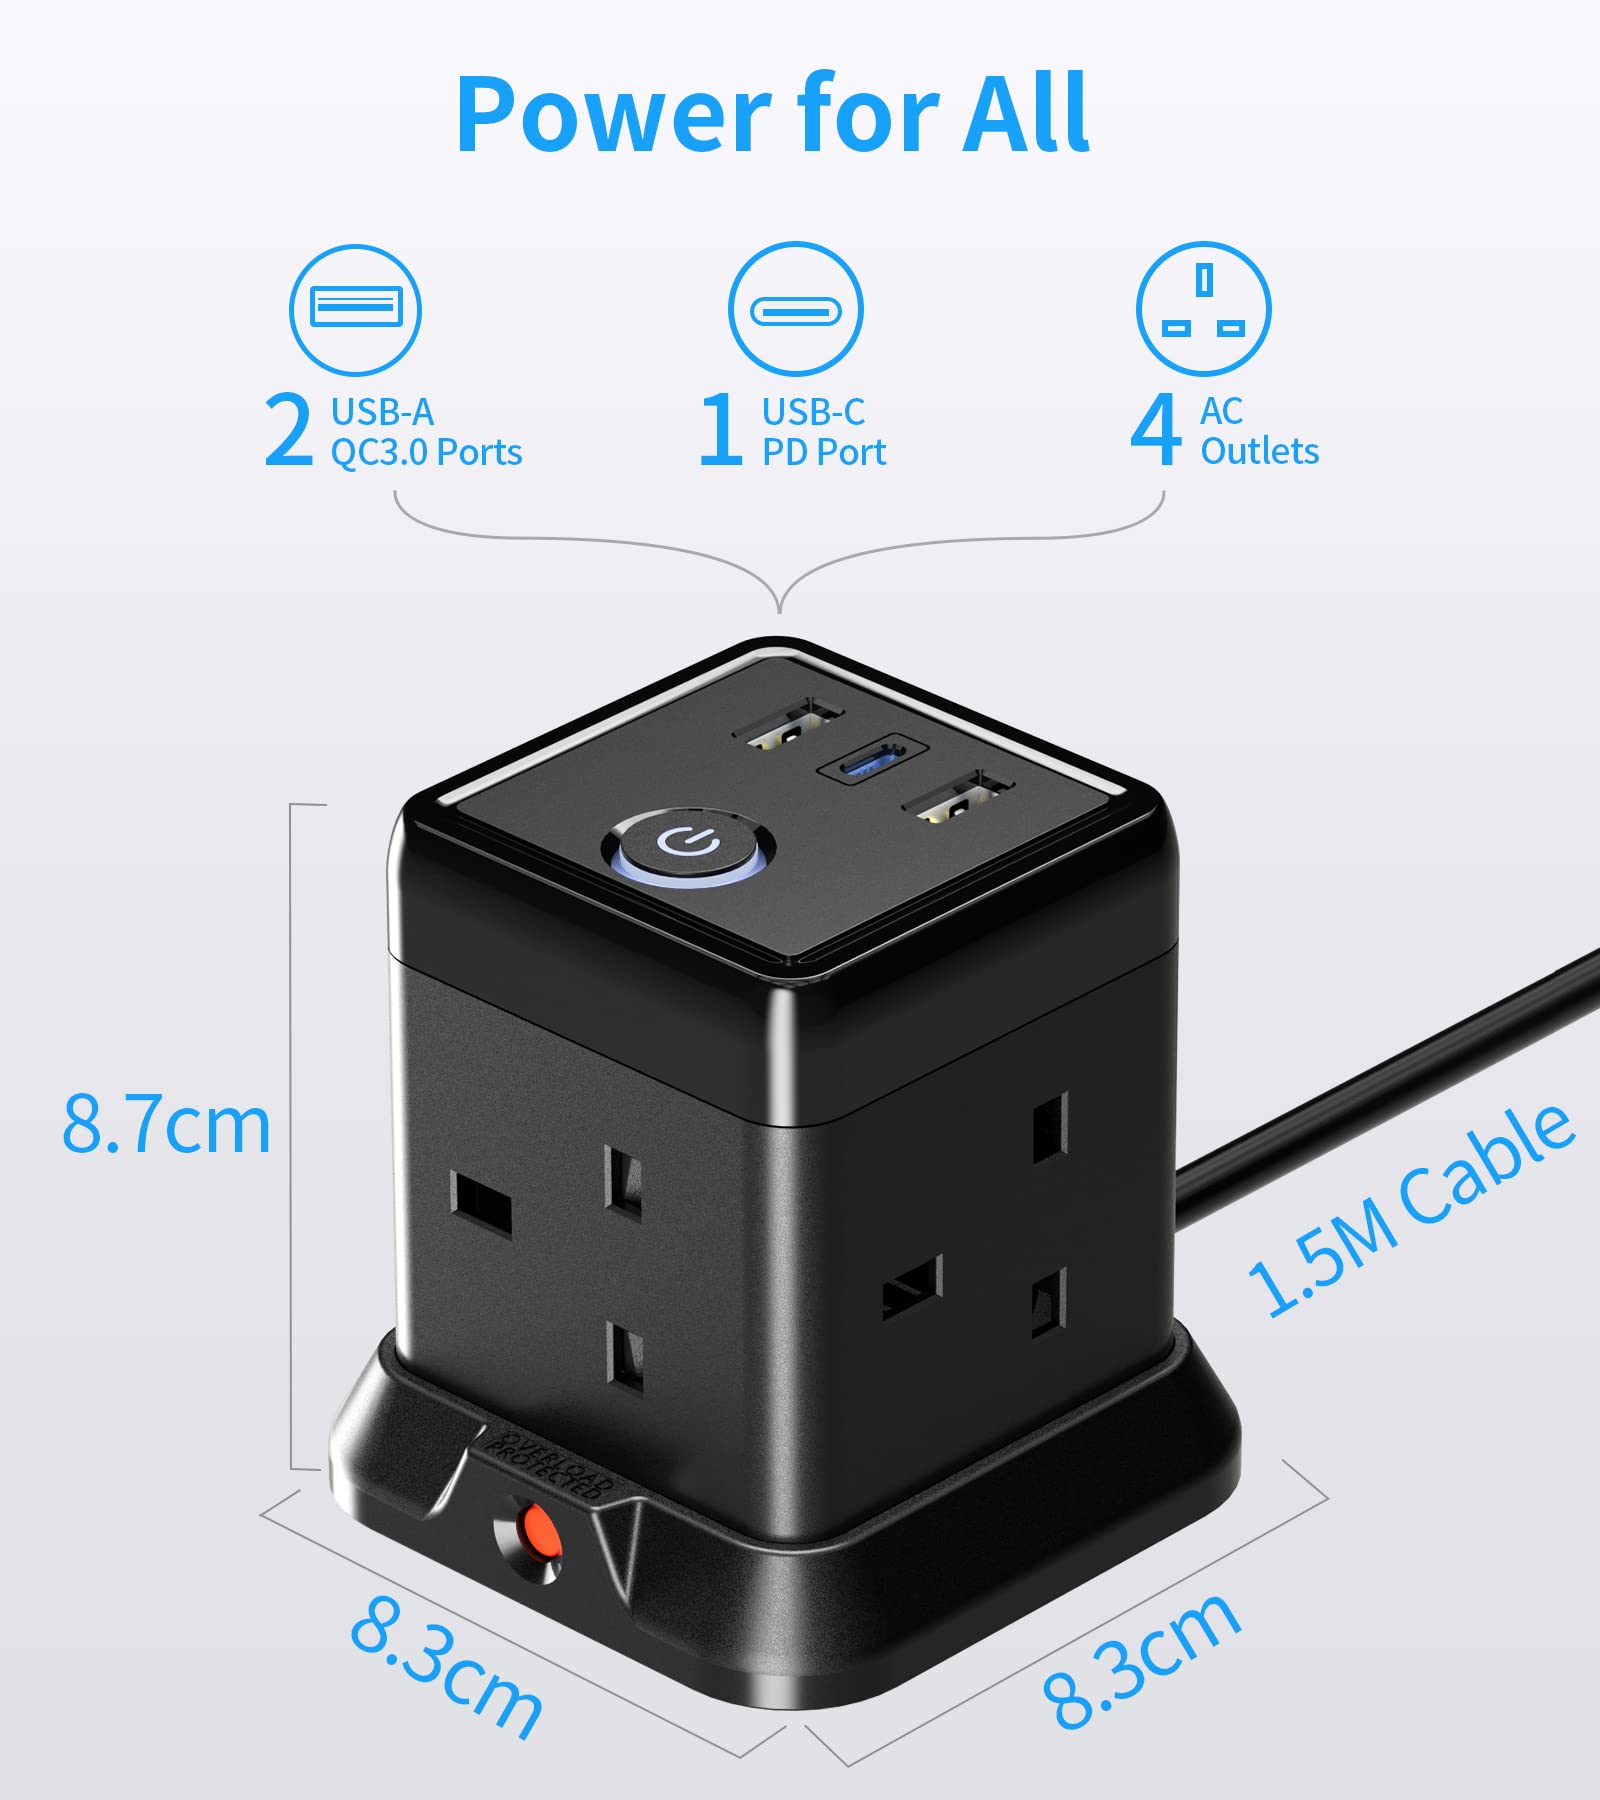 Hulker Cube Extension Lead with USB Ports (20W PD USB C), 4 Way Multi Plug Extension Socket with 3 USB Slots, Mountable Power Strip with Switch Overload Protection 3250W 13A Extension Cord 1.5M